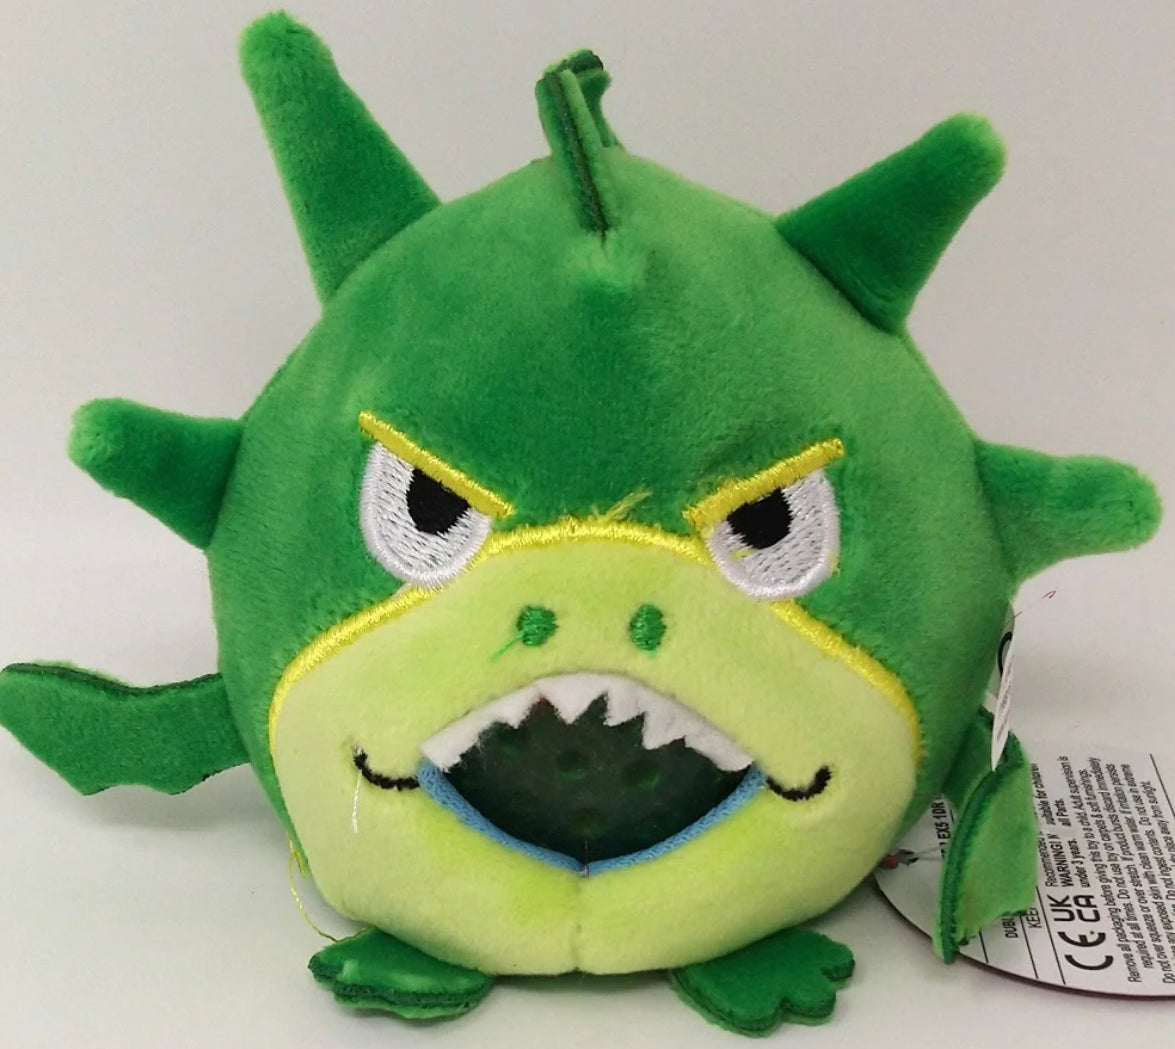 Plush Jelly Squeevils